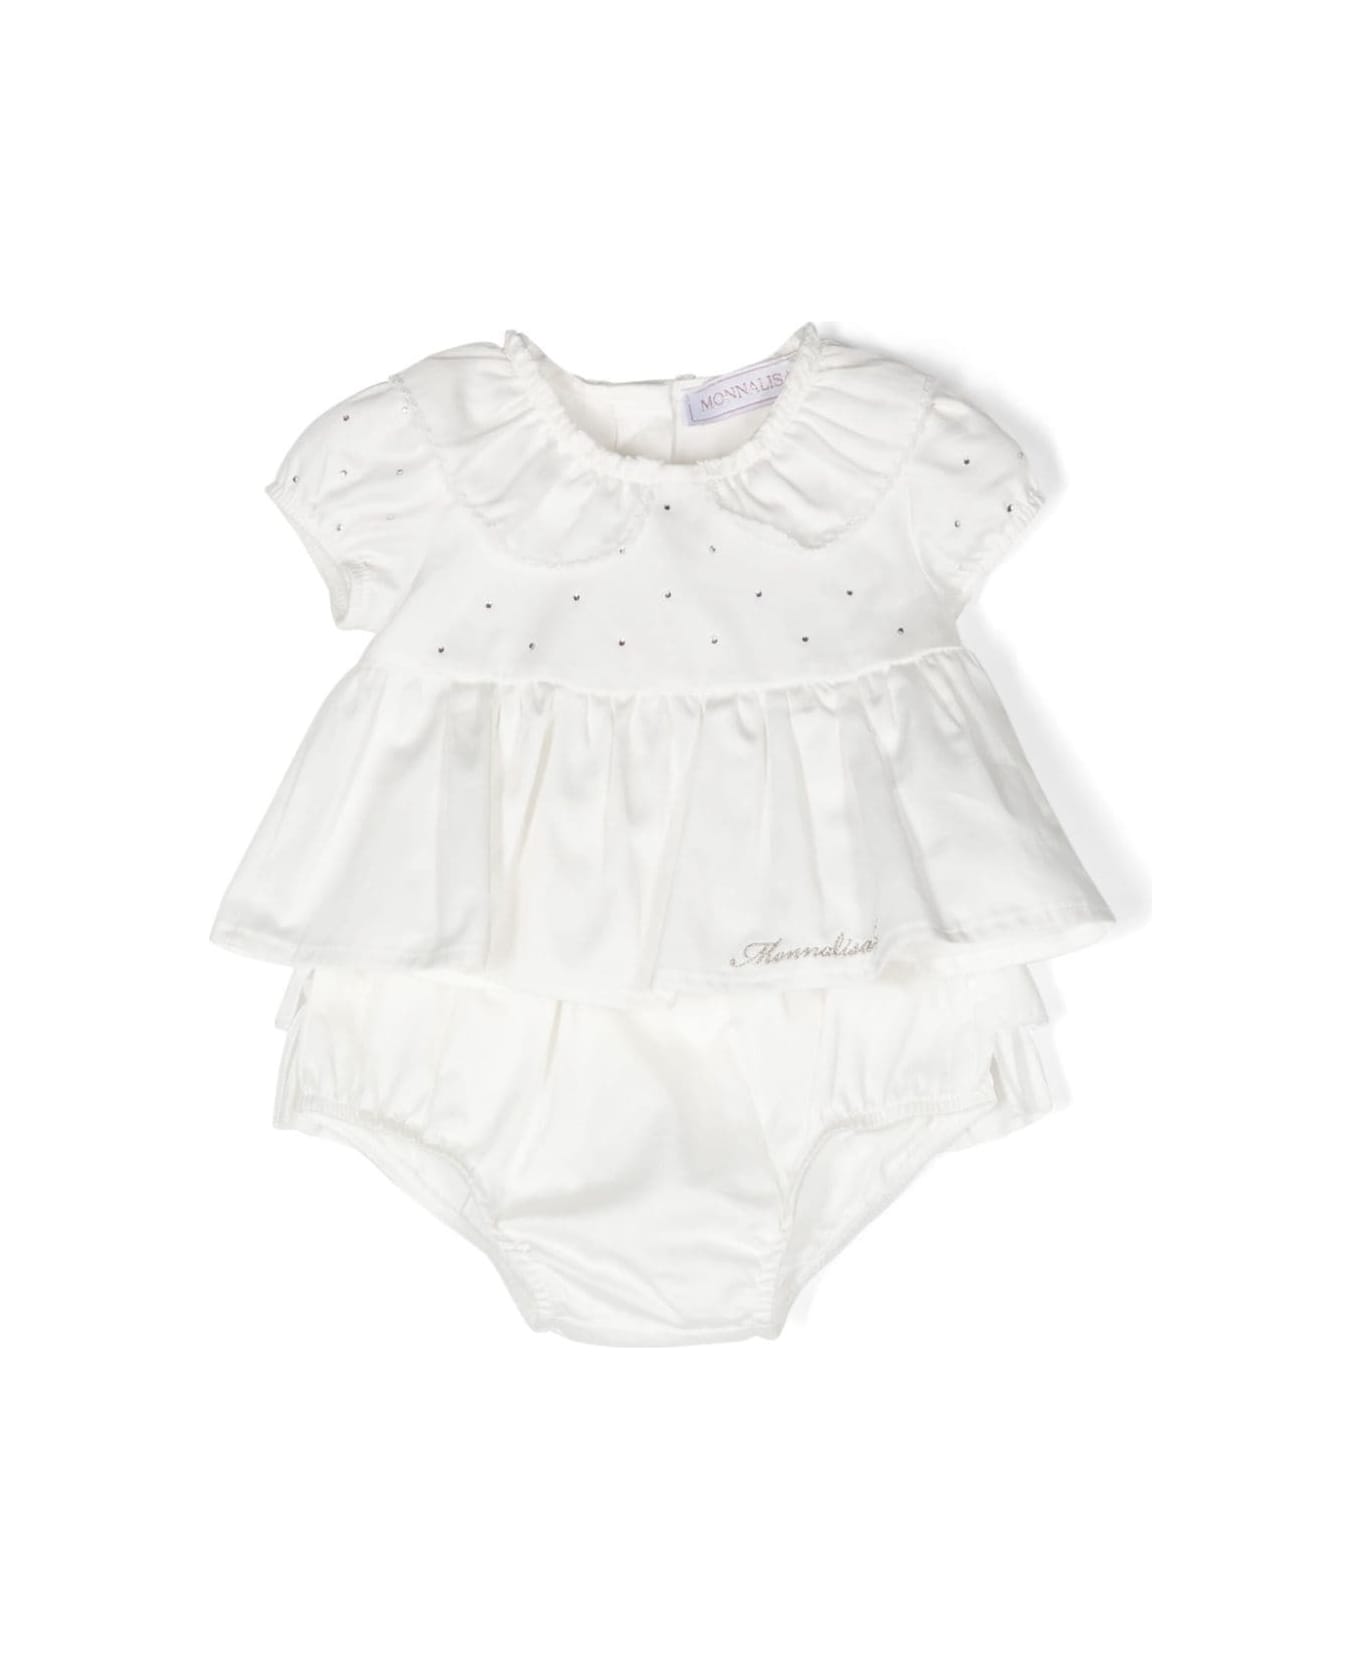 Monnalisa White Romper With Peter Pan Collar And Rhinestone In Cotton Baby - White